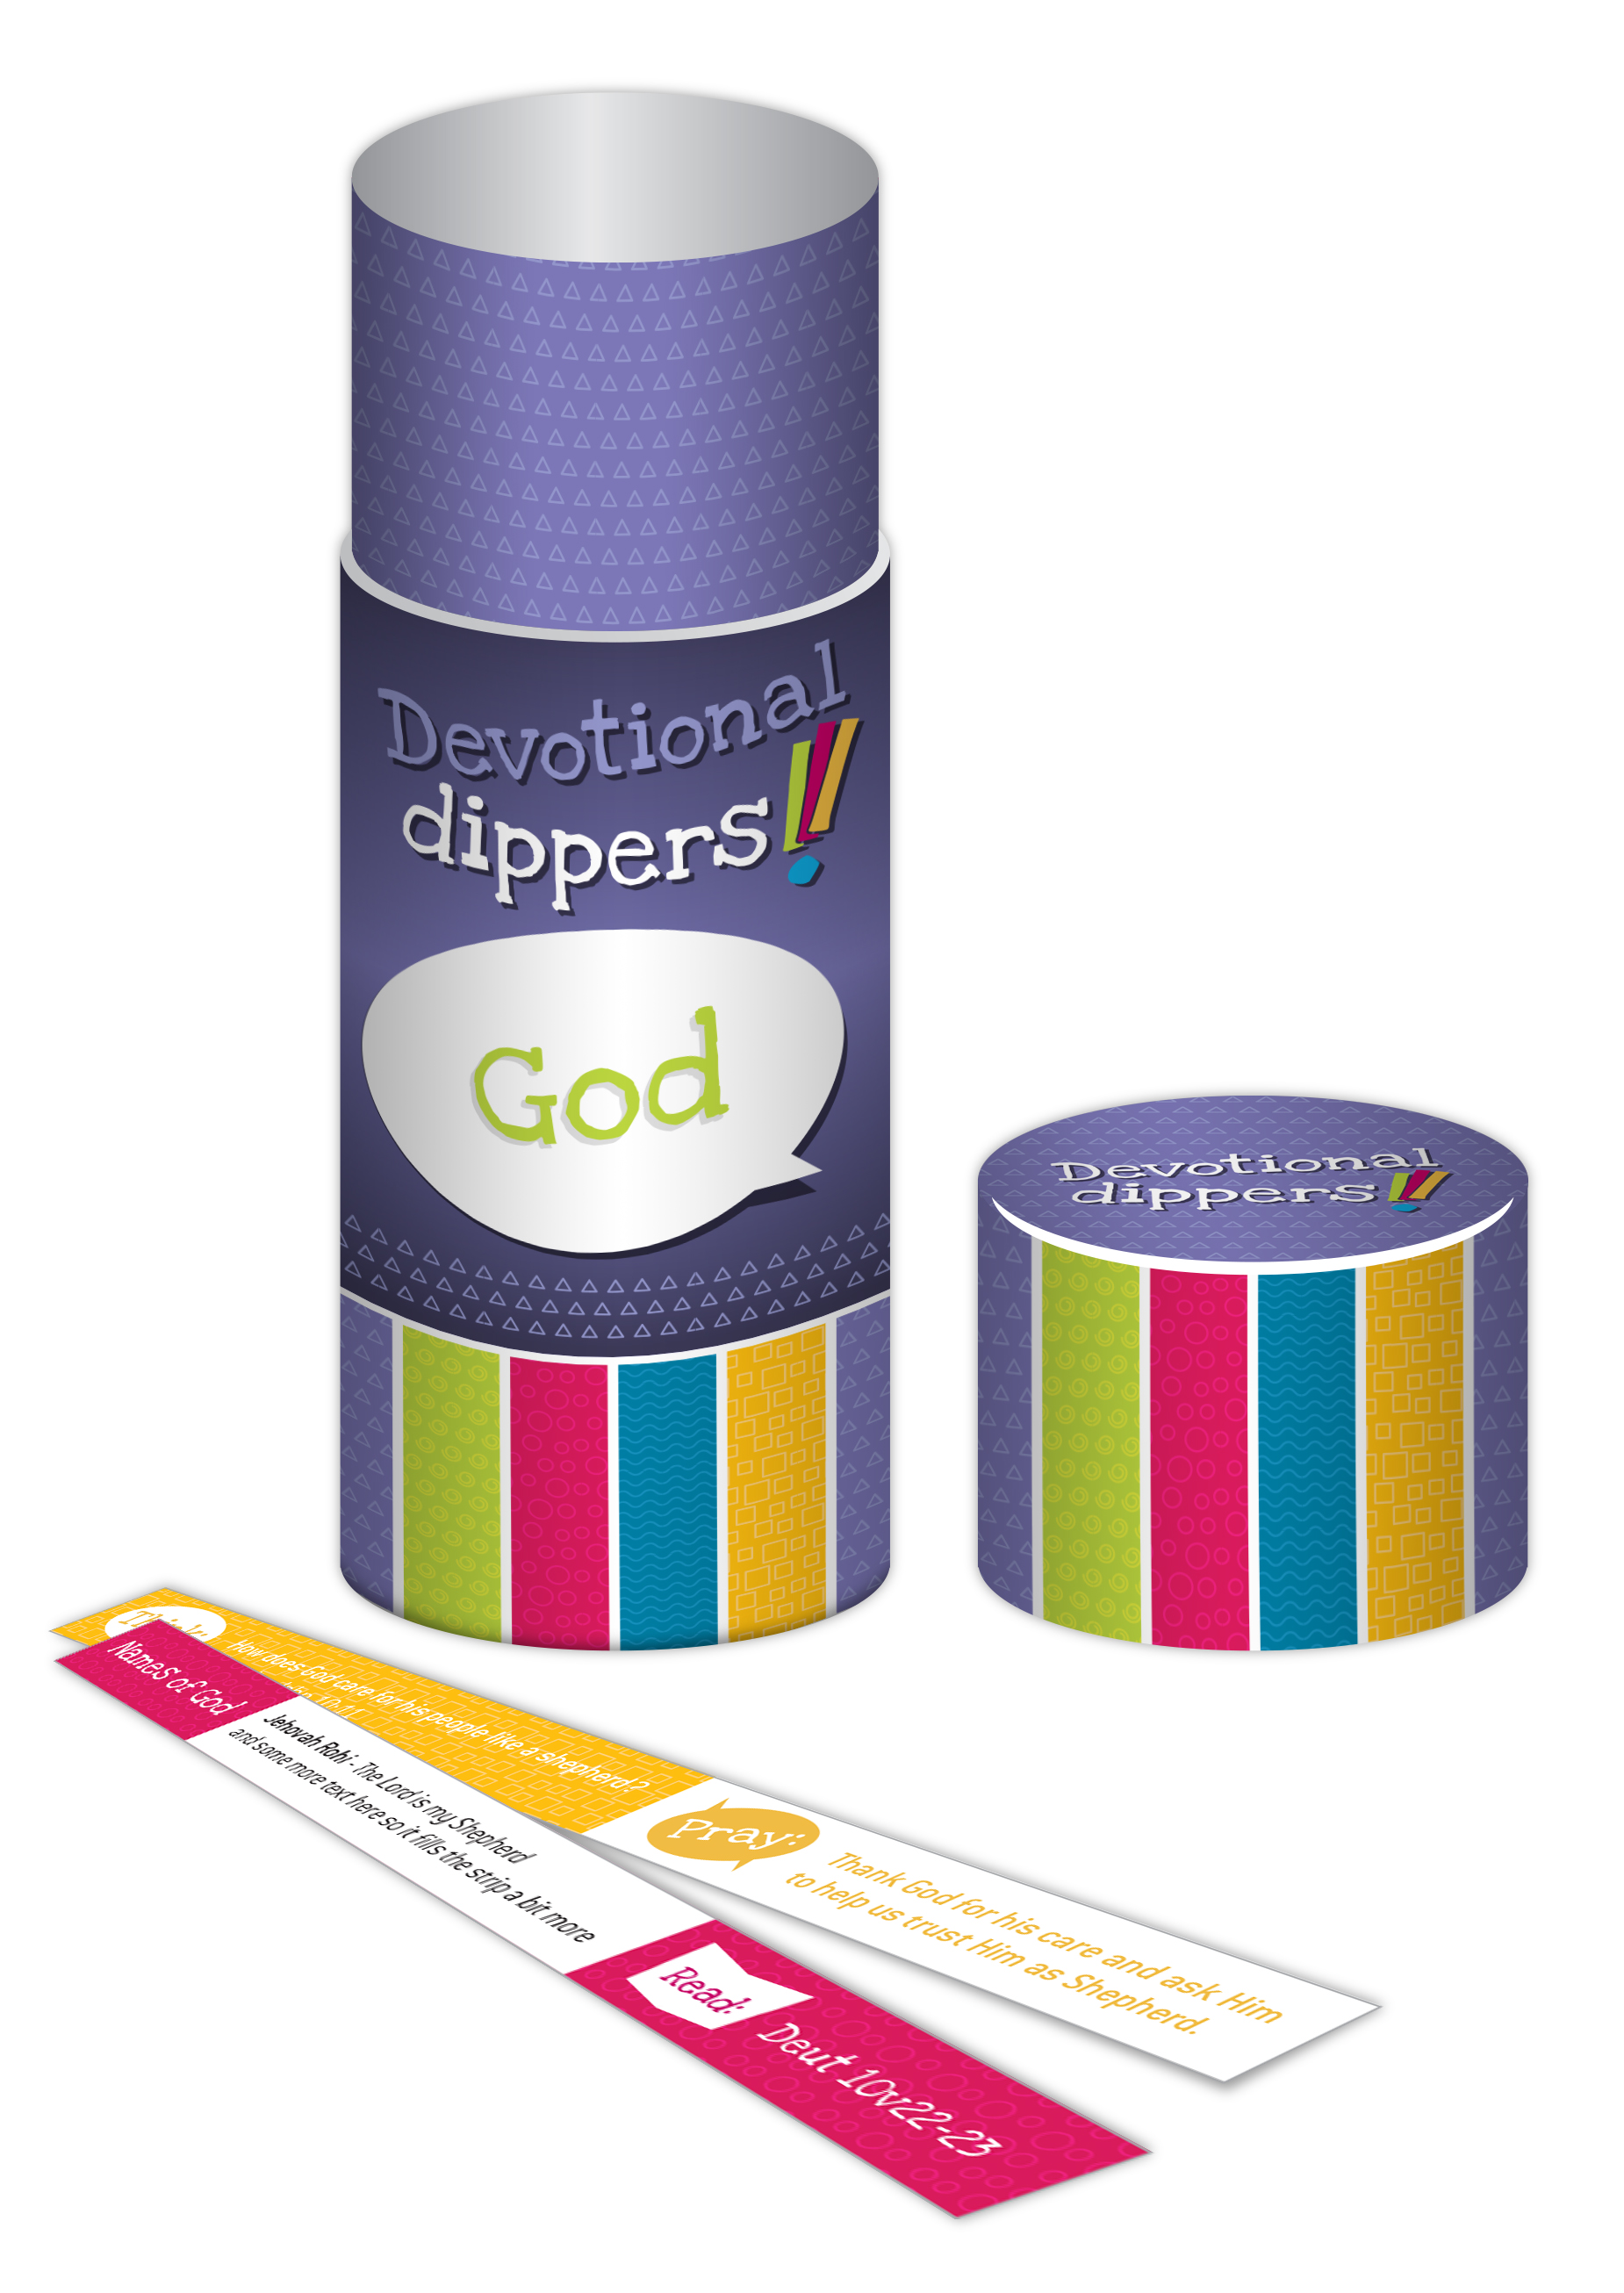 Devotional Dippers - Names and attributes of God